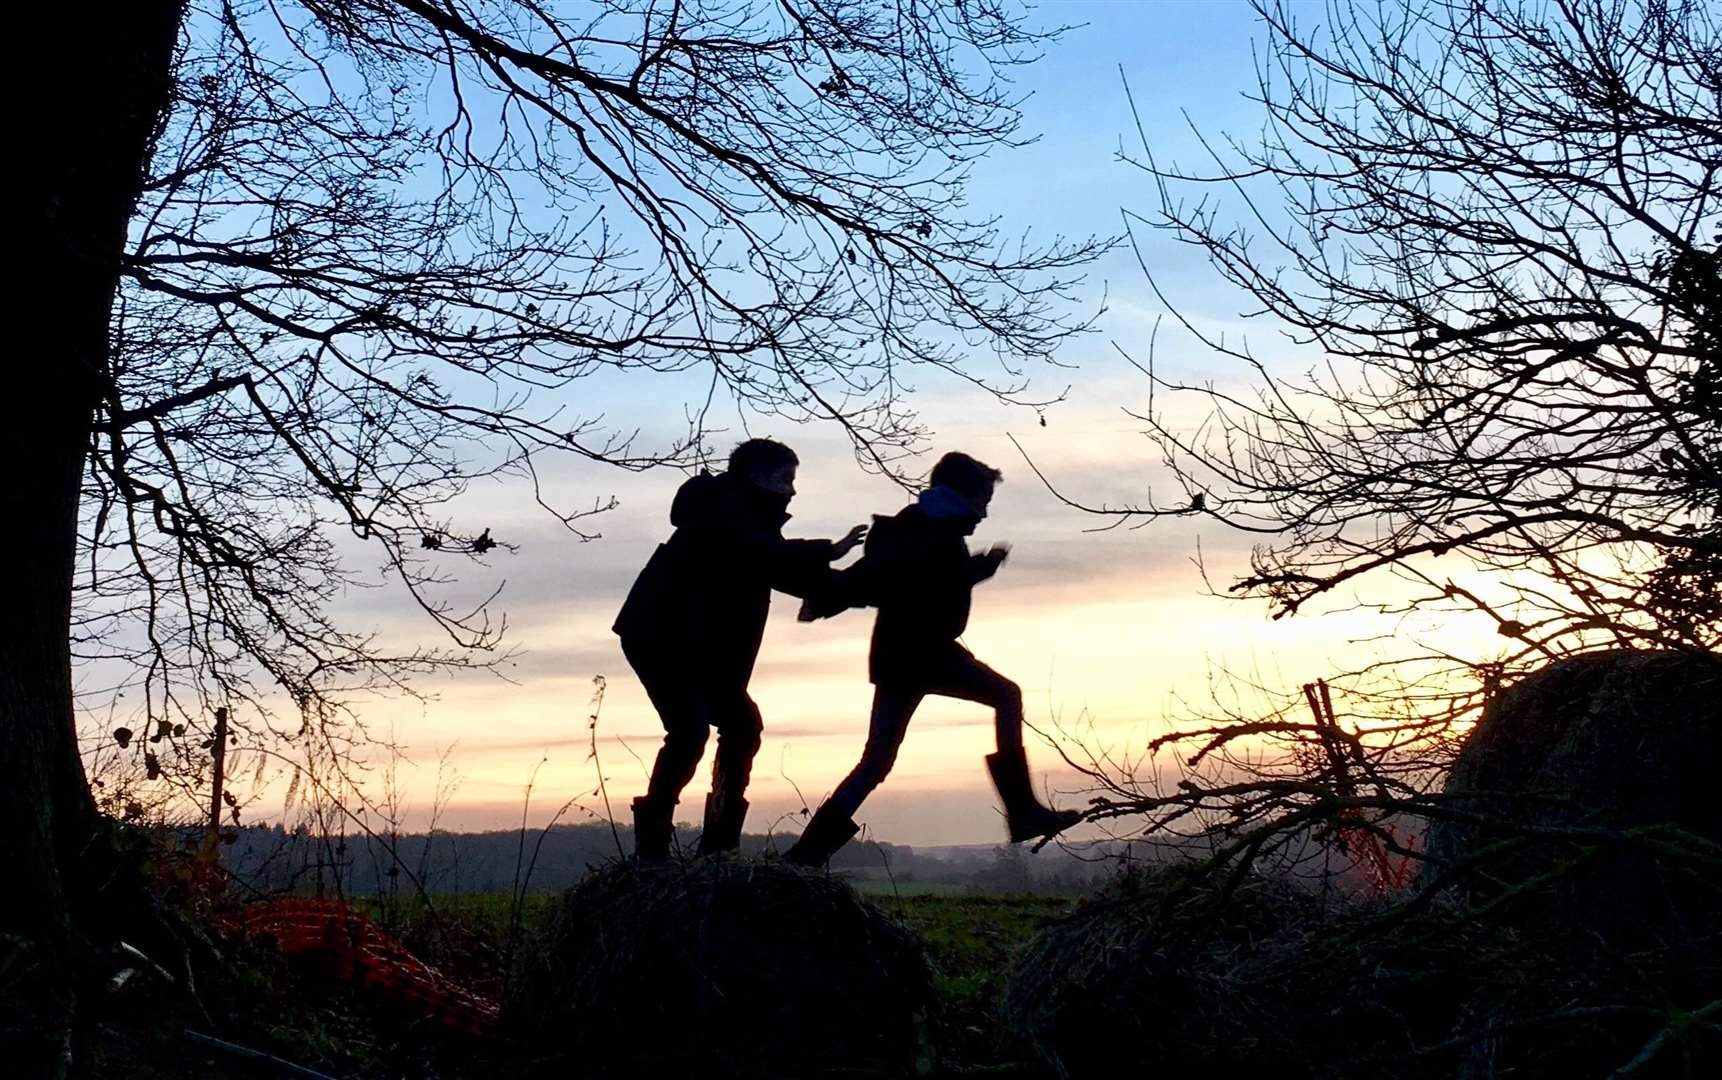 Victoria Harding took this eyecatching picture of her two boys playing in woods at Shepherd's Hill, Selling in January